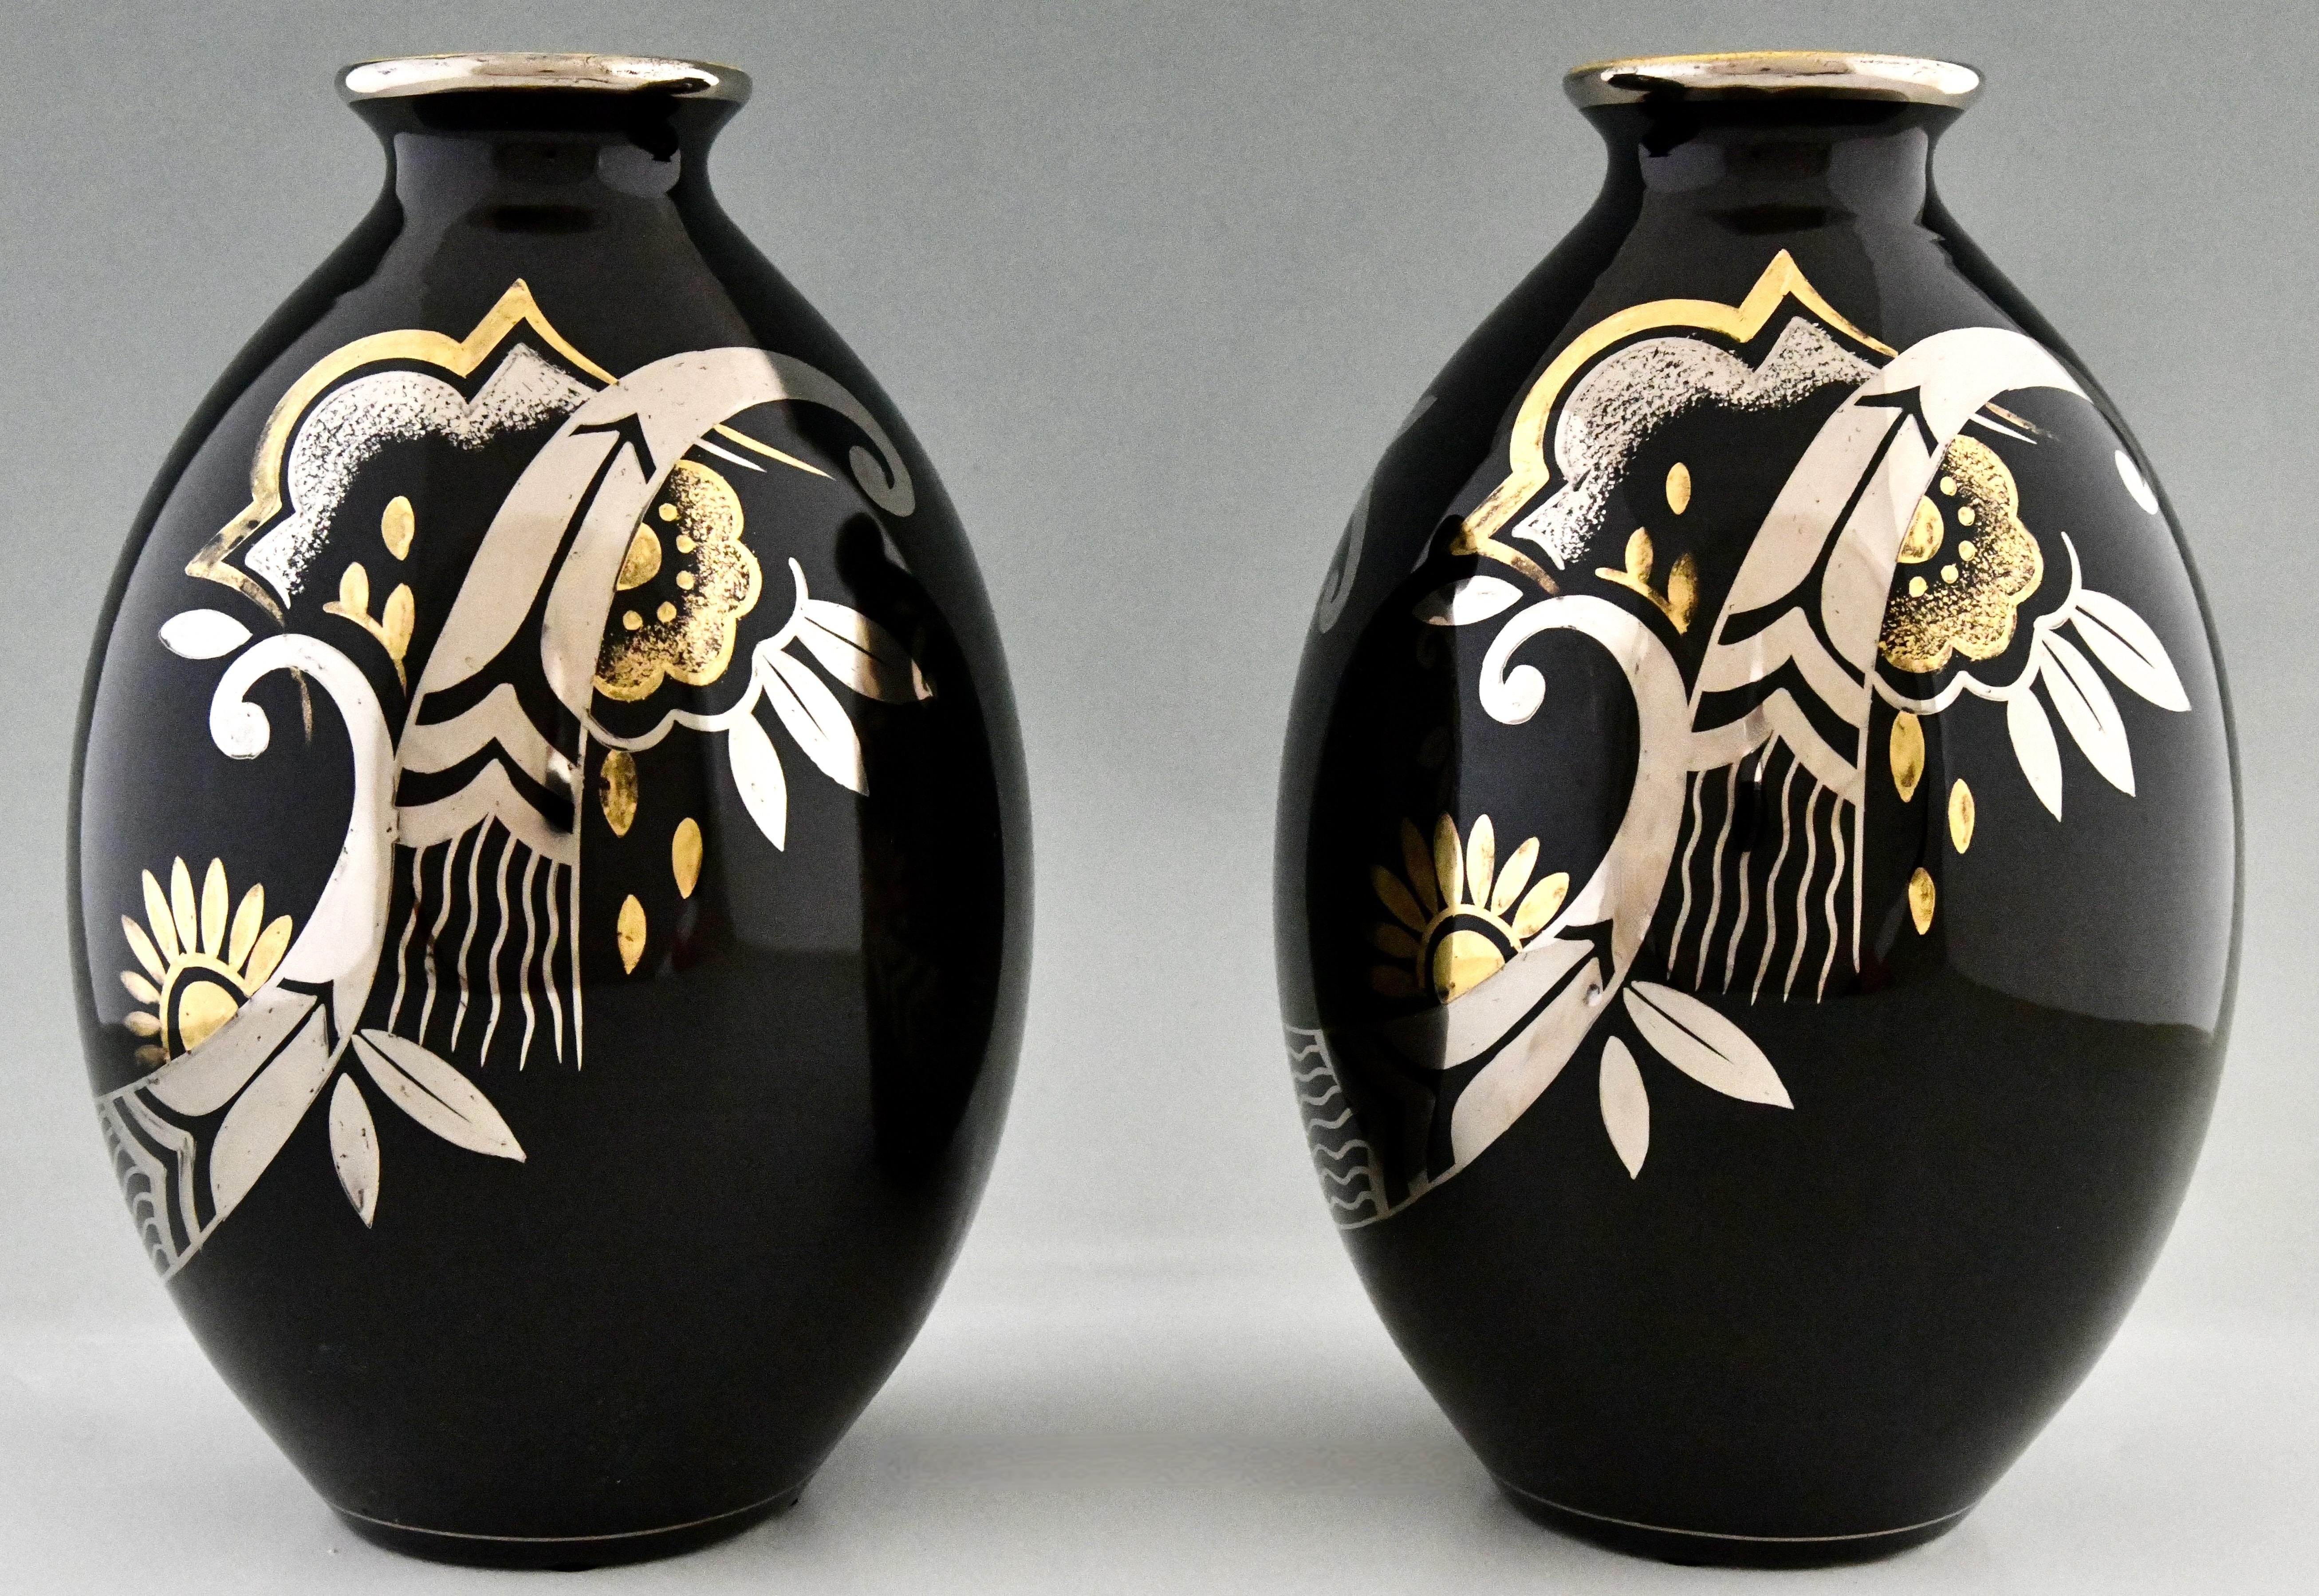 Pair of Art Deco vases with flowers and Art Deco pattern in silver and gold on a black shiny glaze by Boch Frères, La Louvière. 
With Boch Frères stamp. Model number D 1780.
Belgium, 1931/1932.
Literature:
L'homme de Keramis Charles Catteau,